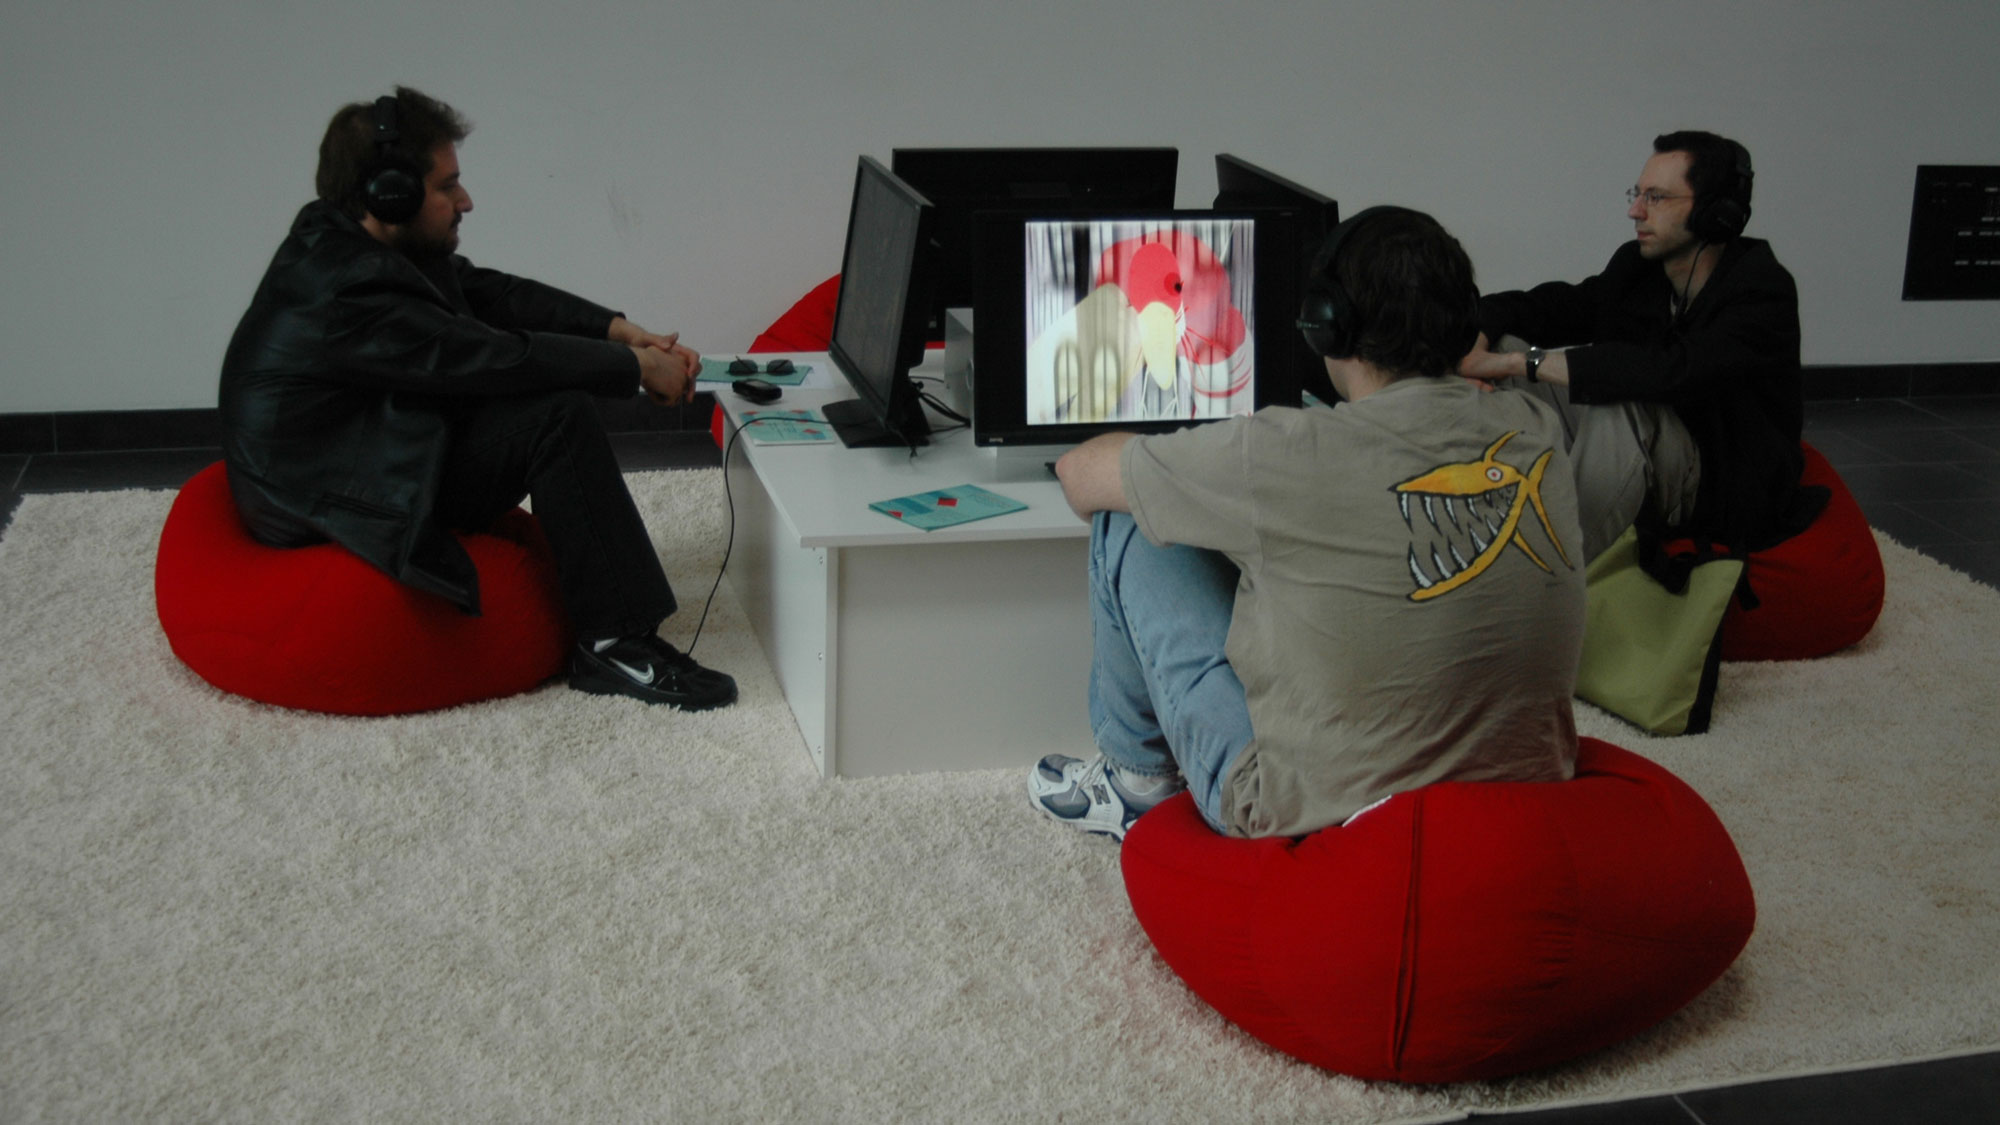 Three men seated on small red bean bag chairs on a white shag rug watching individual screens showing abstract images. 